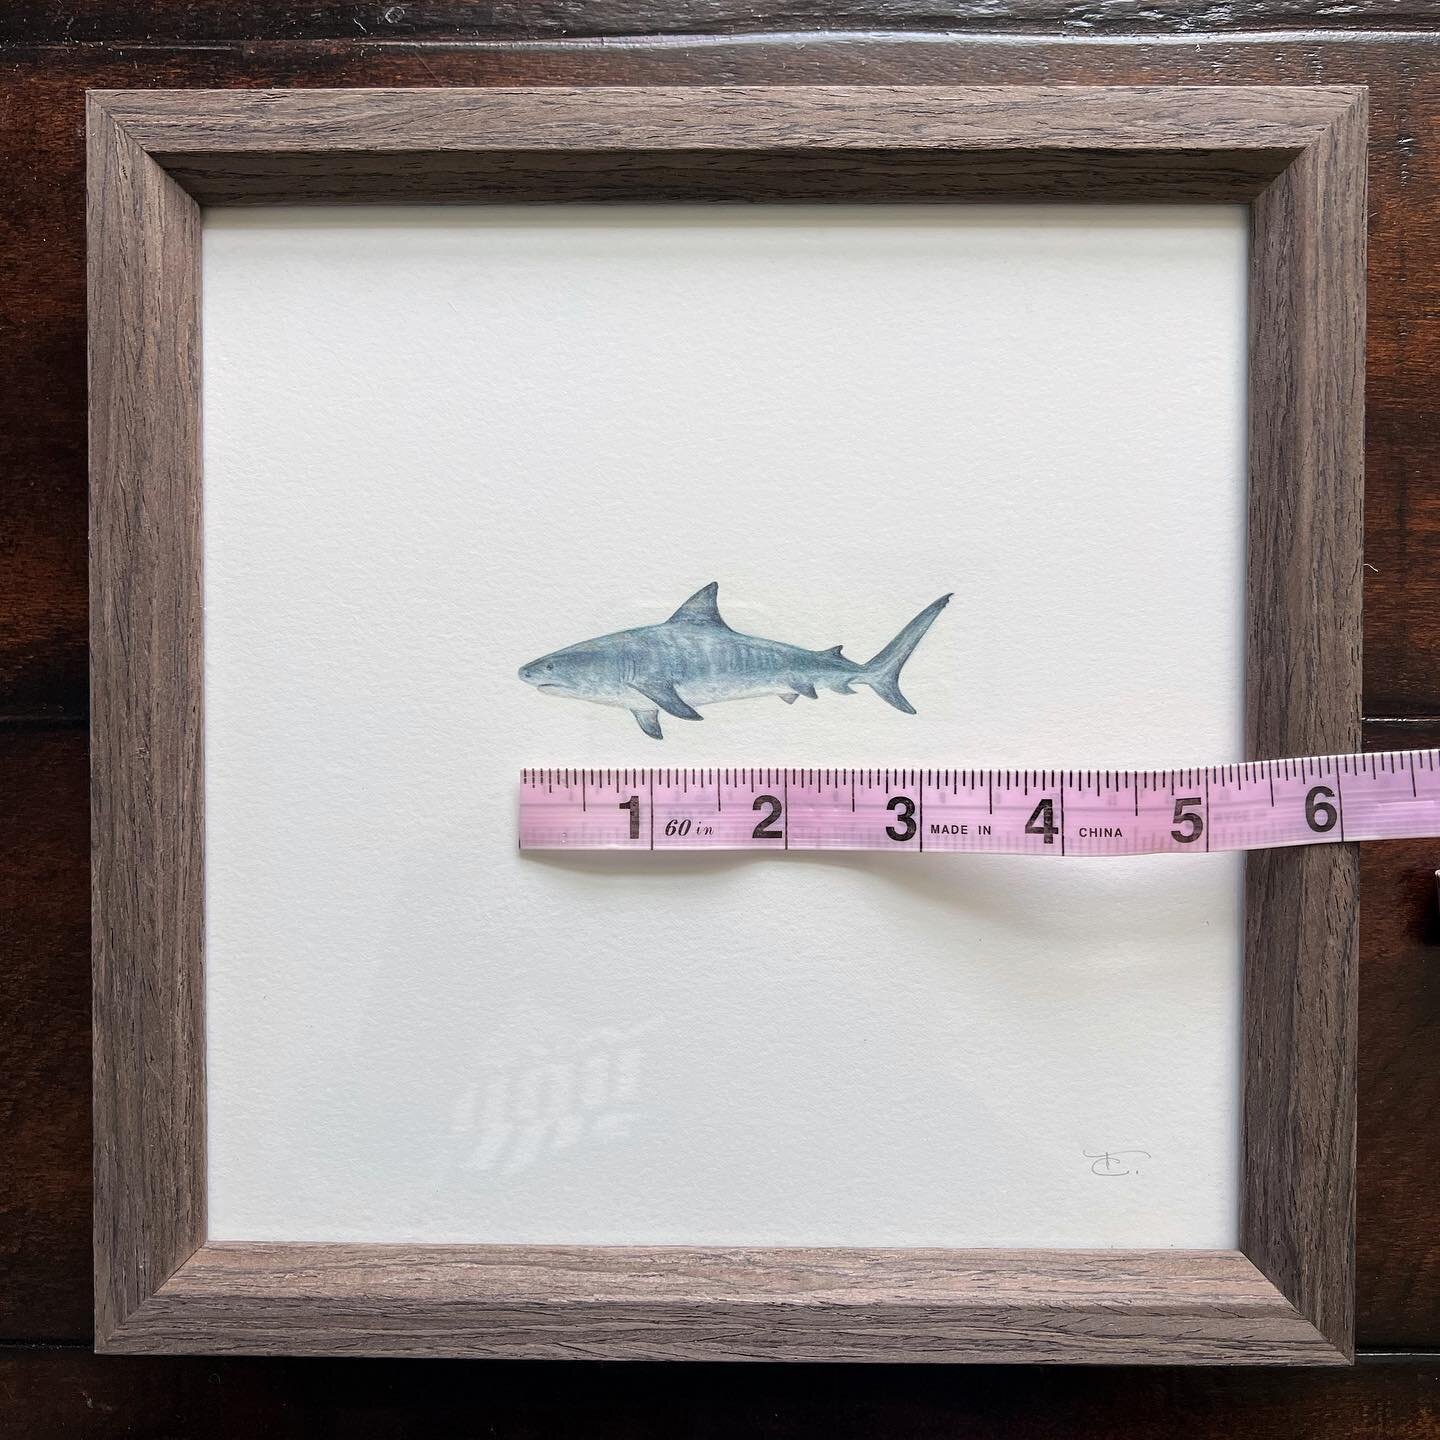 A small but mighty 3.5 inches, this little GWS will be part of &lsquo;Create: A Jaws Inspired Art Show&rsquo; July 15-22 at @kjeldmahoney_afterglowfineart gallery &mdash; such a fun theme and so much amazing work to see!

&lsquo;You&rsquo;re Gonna Ne